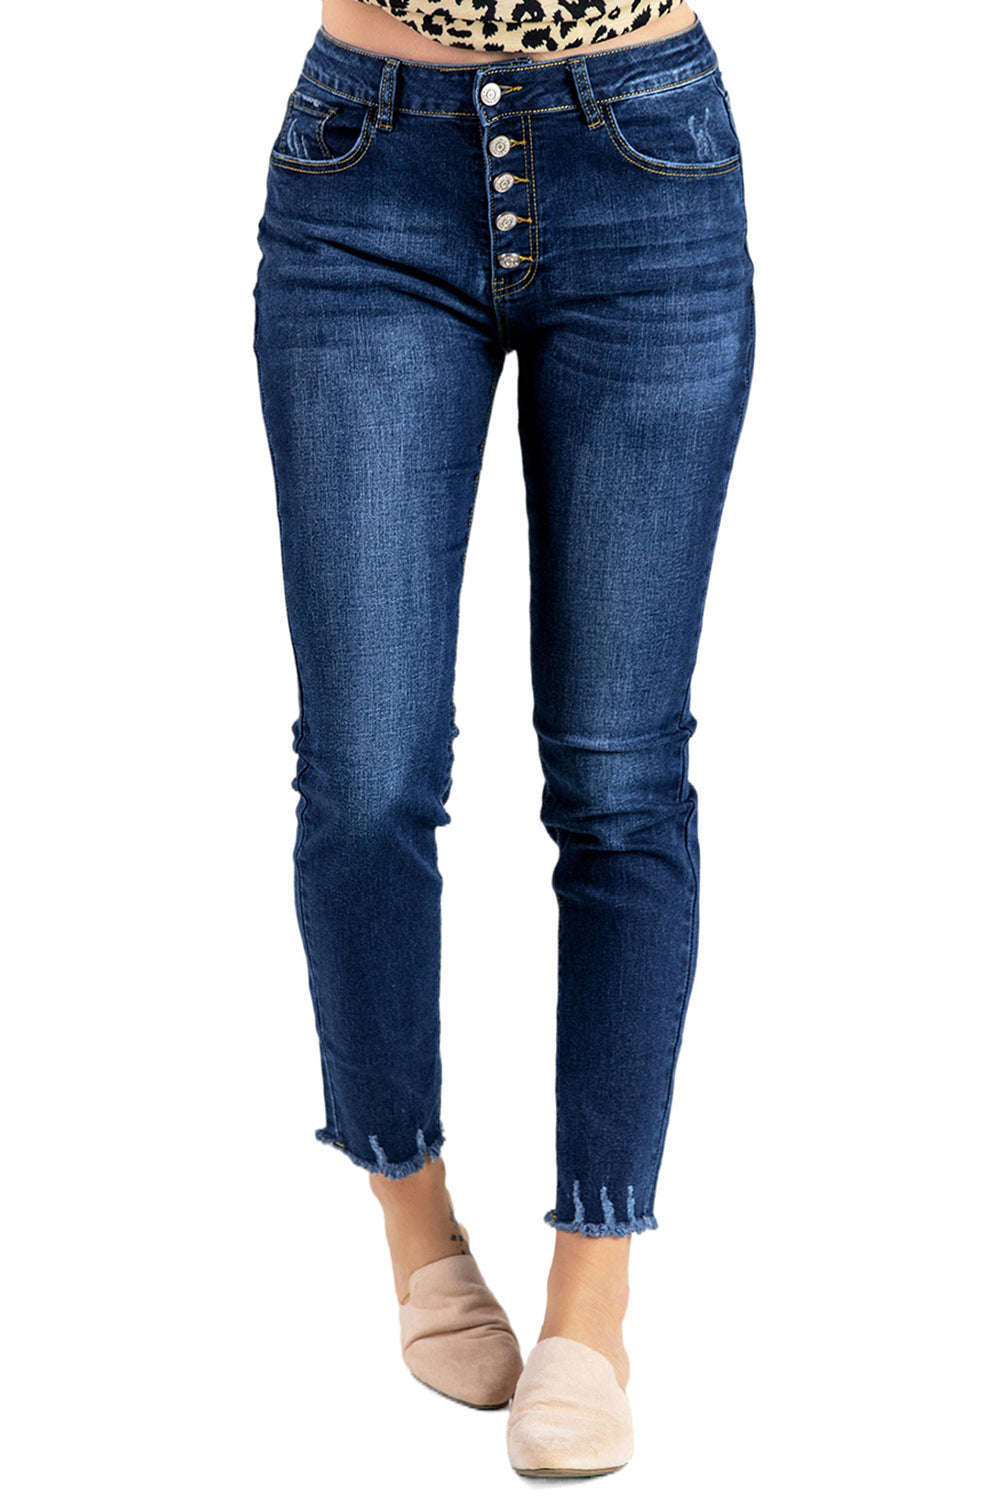 Blue Women's Skinny Jeans with Buttons Casual Stretchy High Waisted Jeans LC78896-5